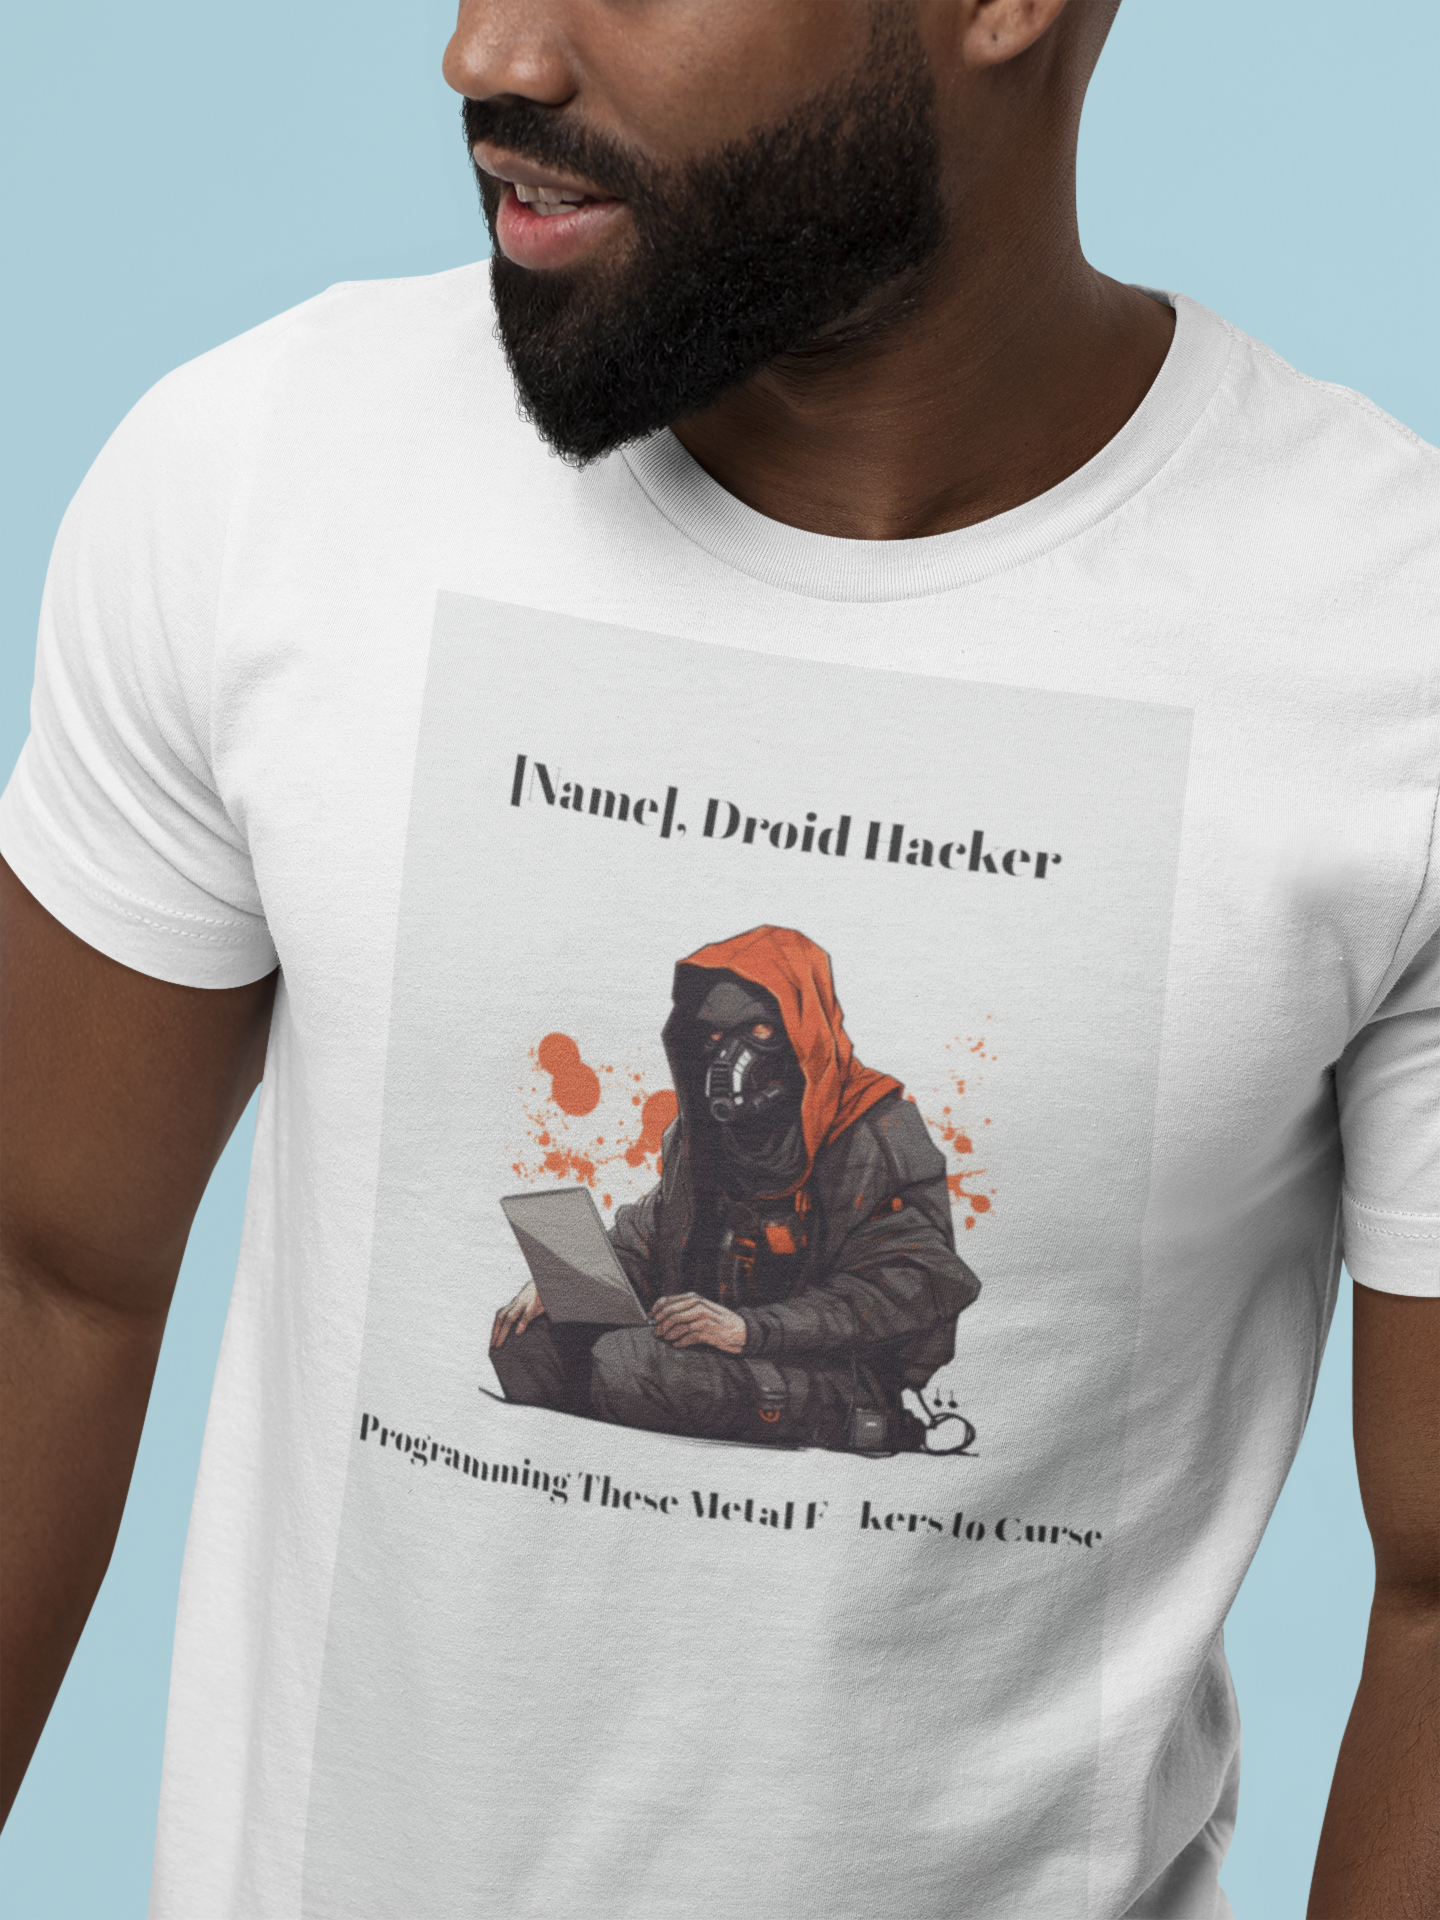 Star Wars Funny Witty Retro Shirt of Star Wars  Droid Hacker, Hacking Droids to Curse with Abandon. Funny Shirt Perfect for Star Wars Rebels Fans and Lego Star Wars.